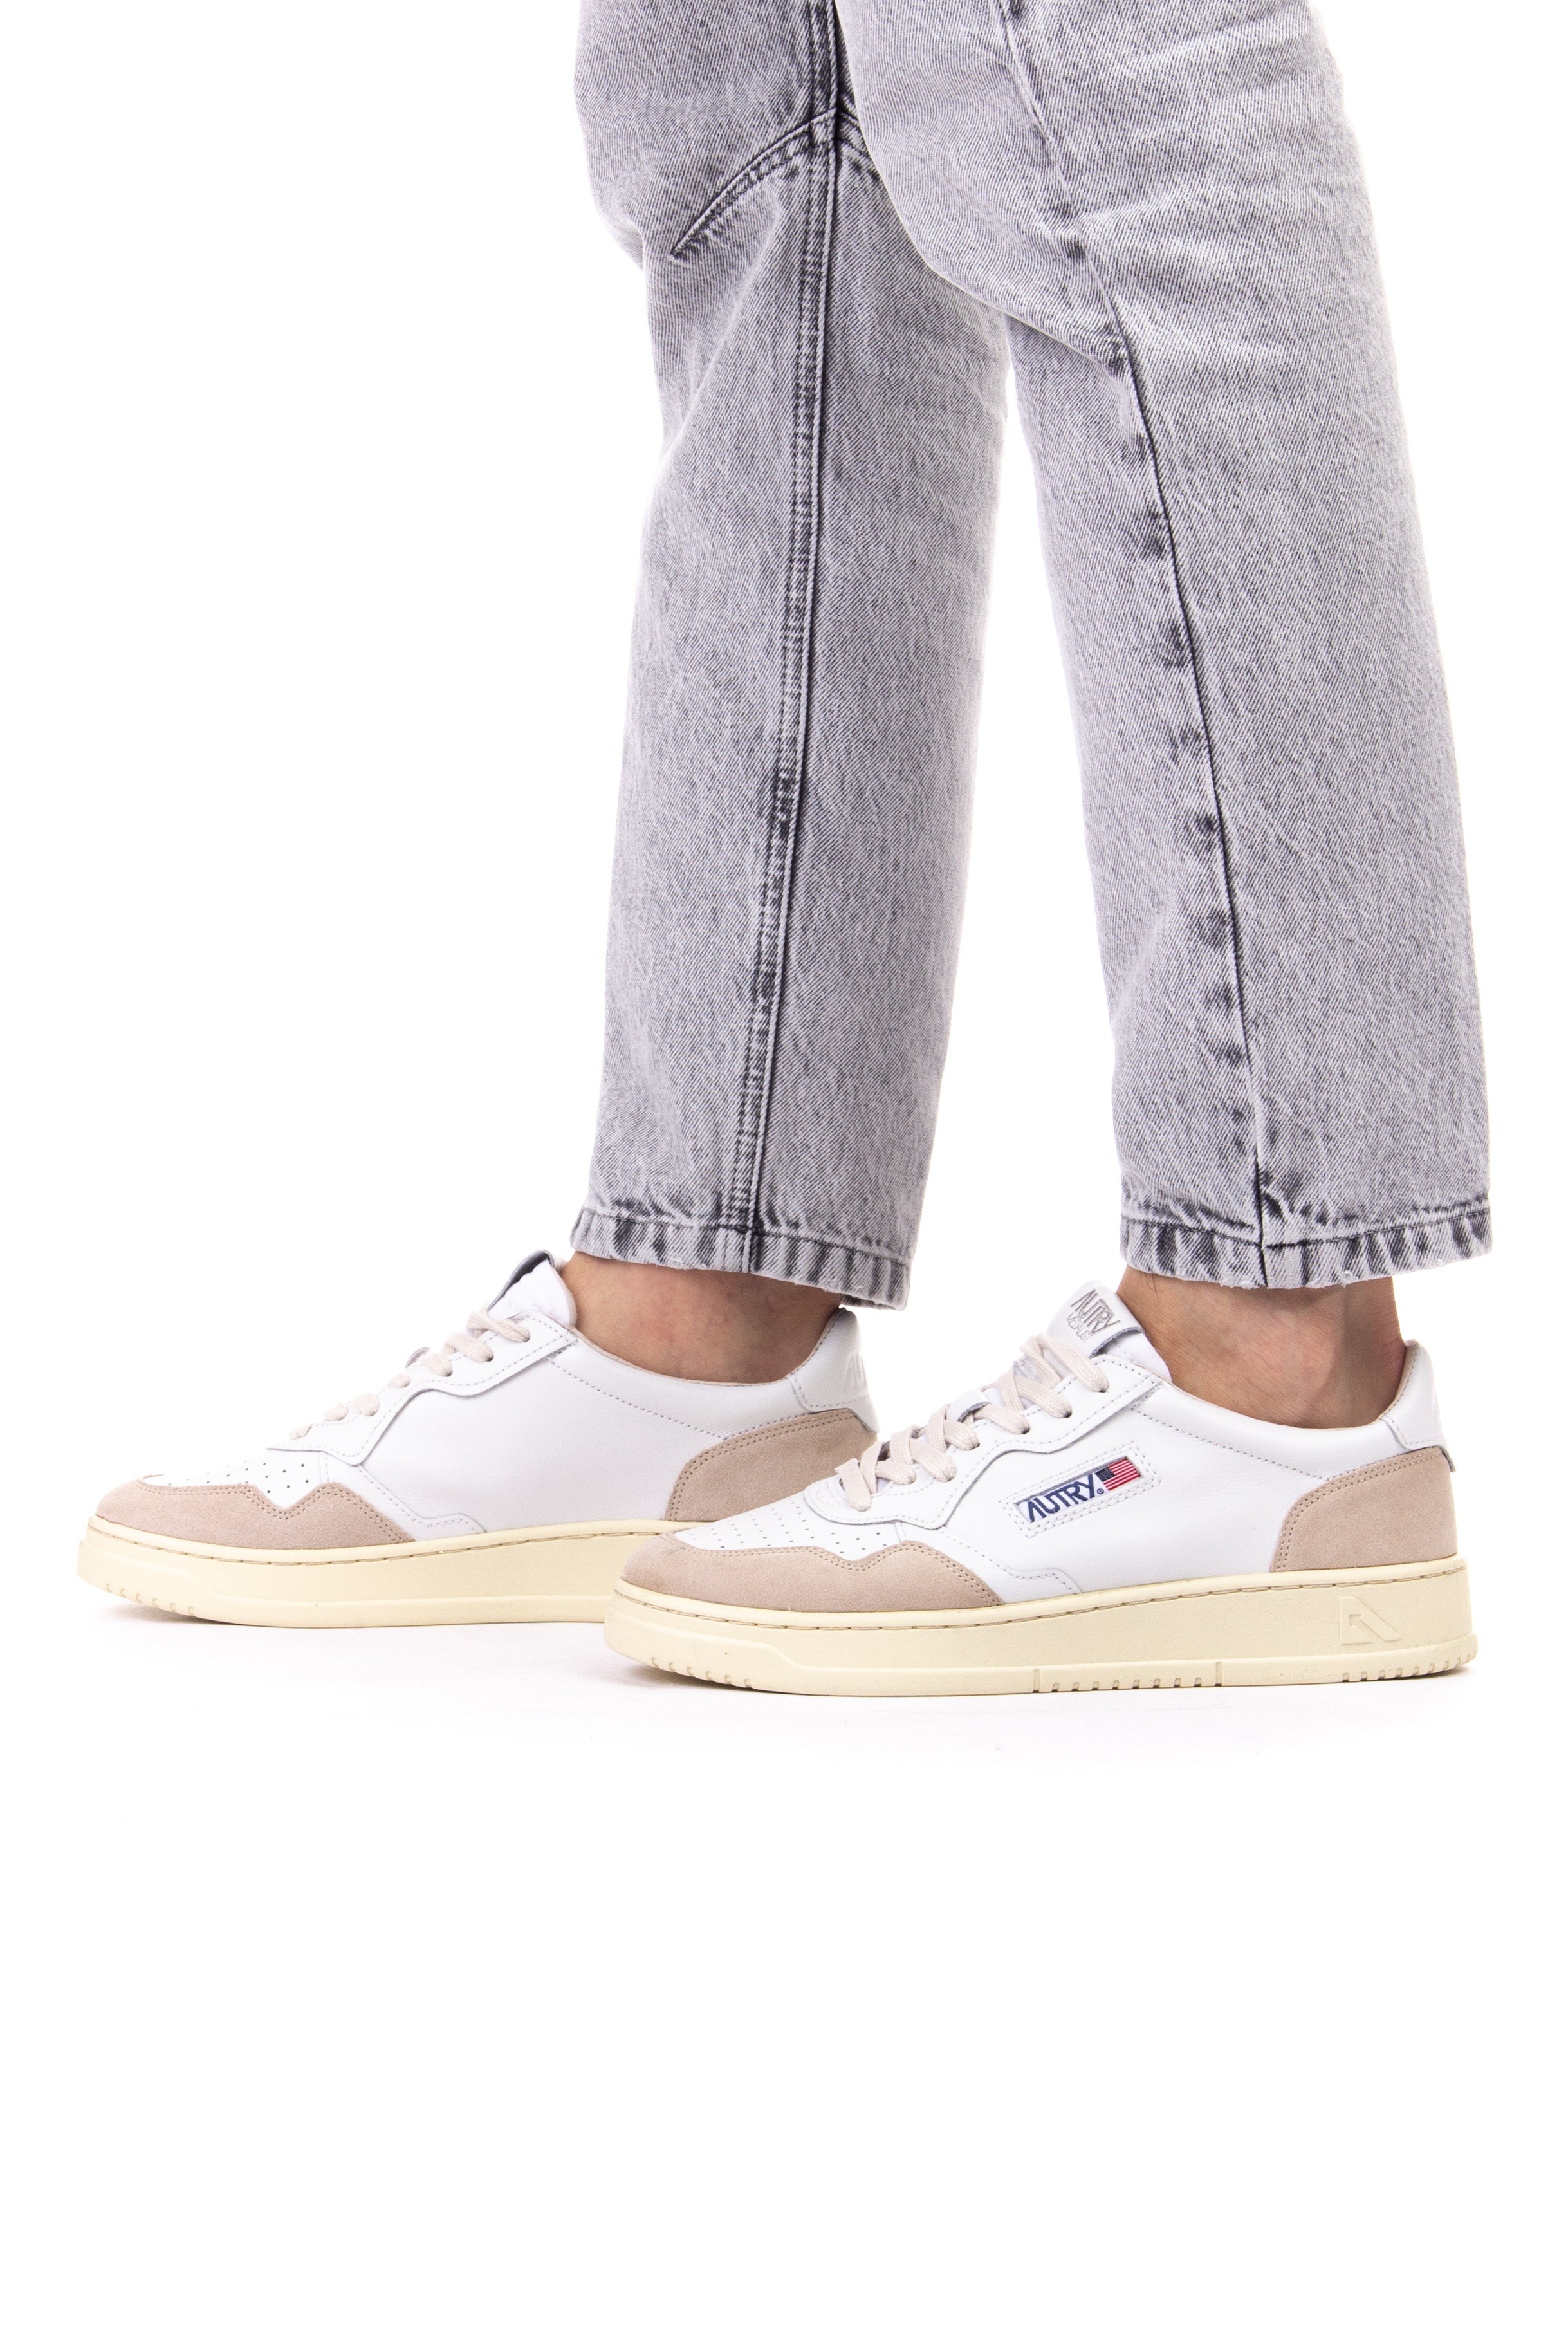 Bi-material sneaker in leather and suede with white heel tab